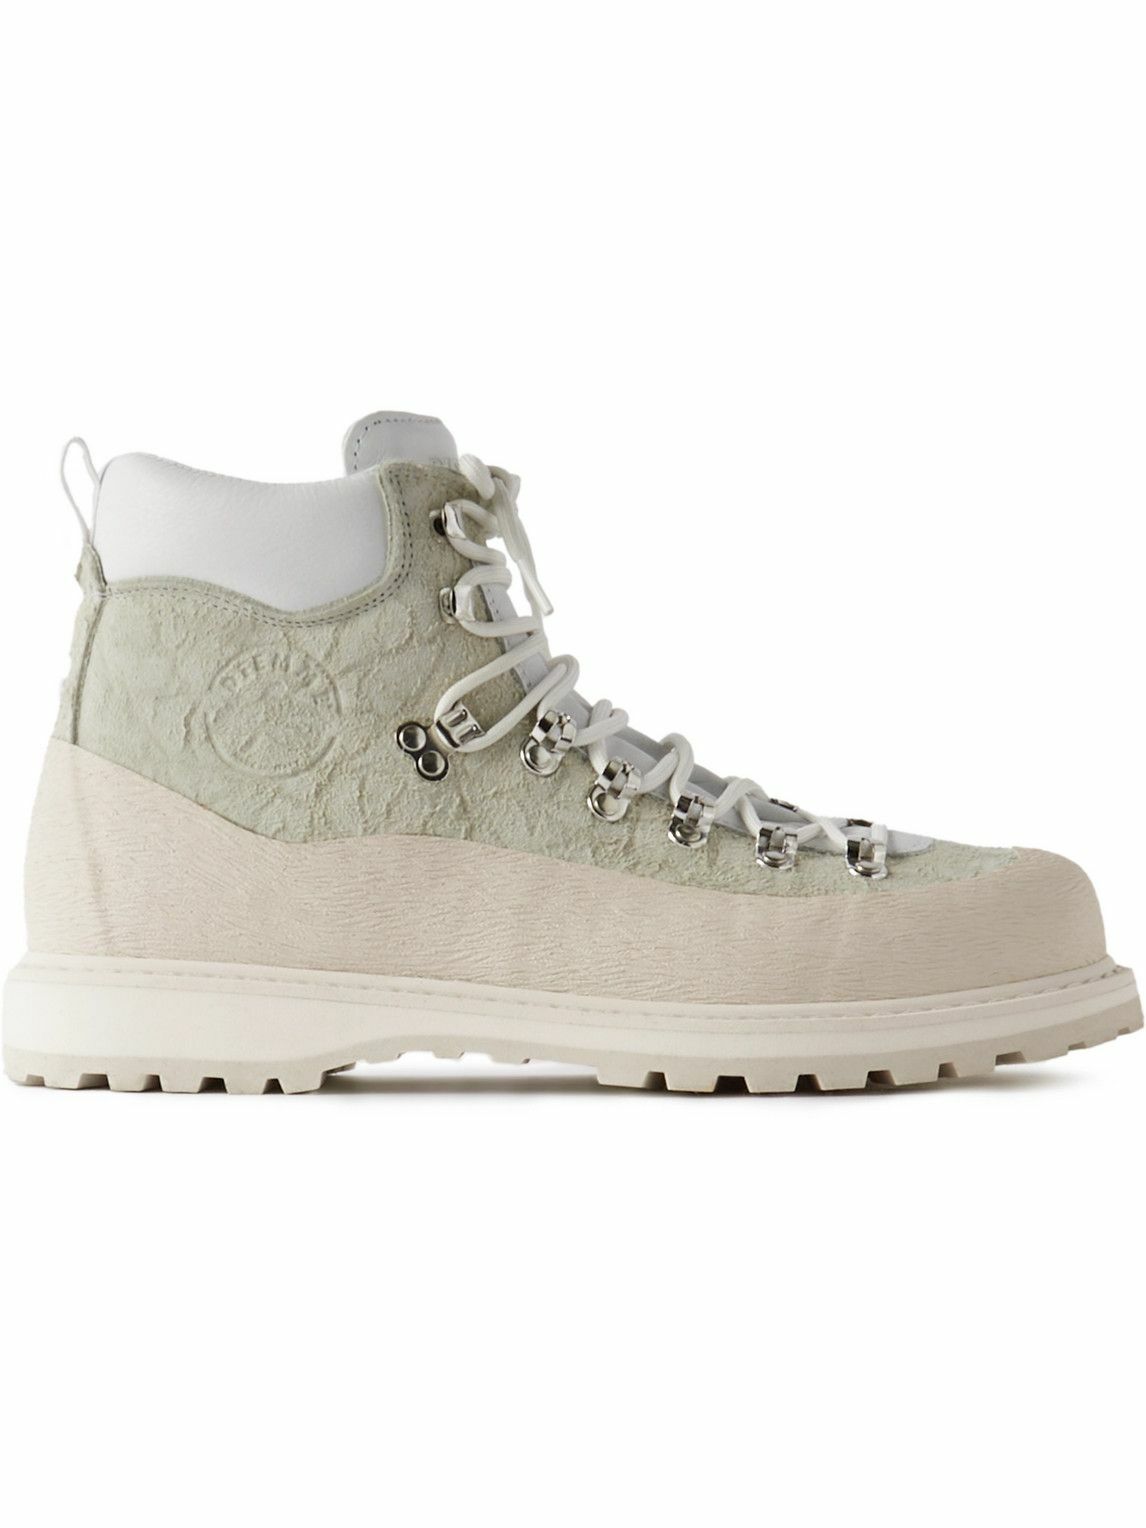 Photo: Diemme - Roccia Vet Suede and Rubber Hiking Boots - White